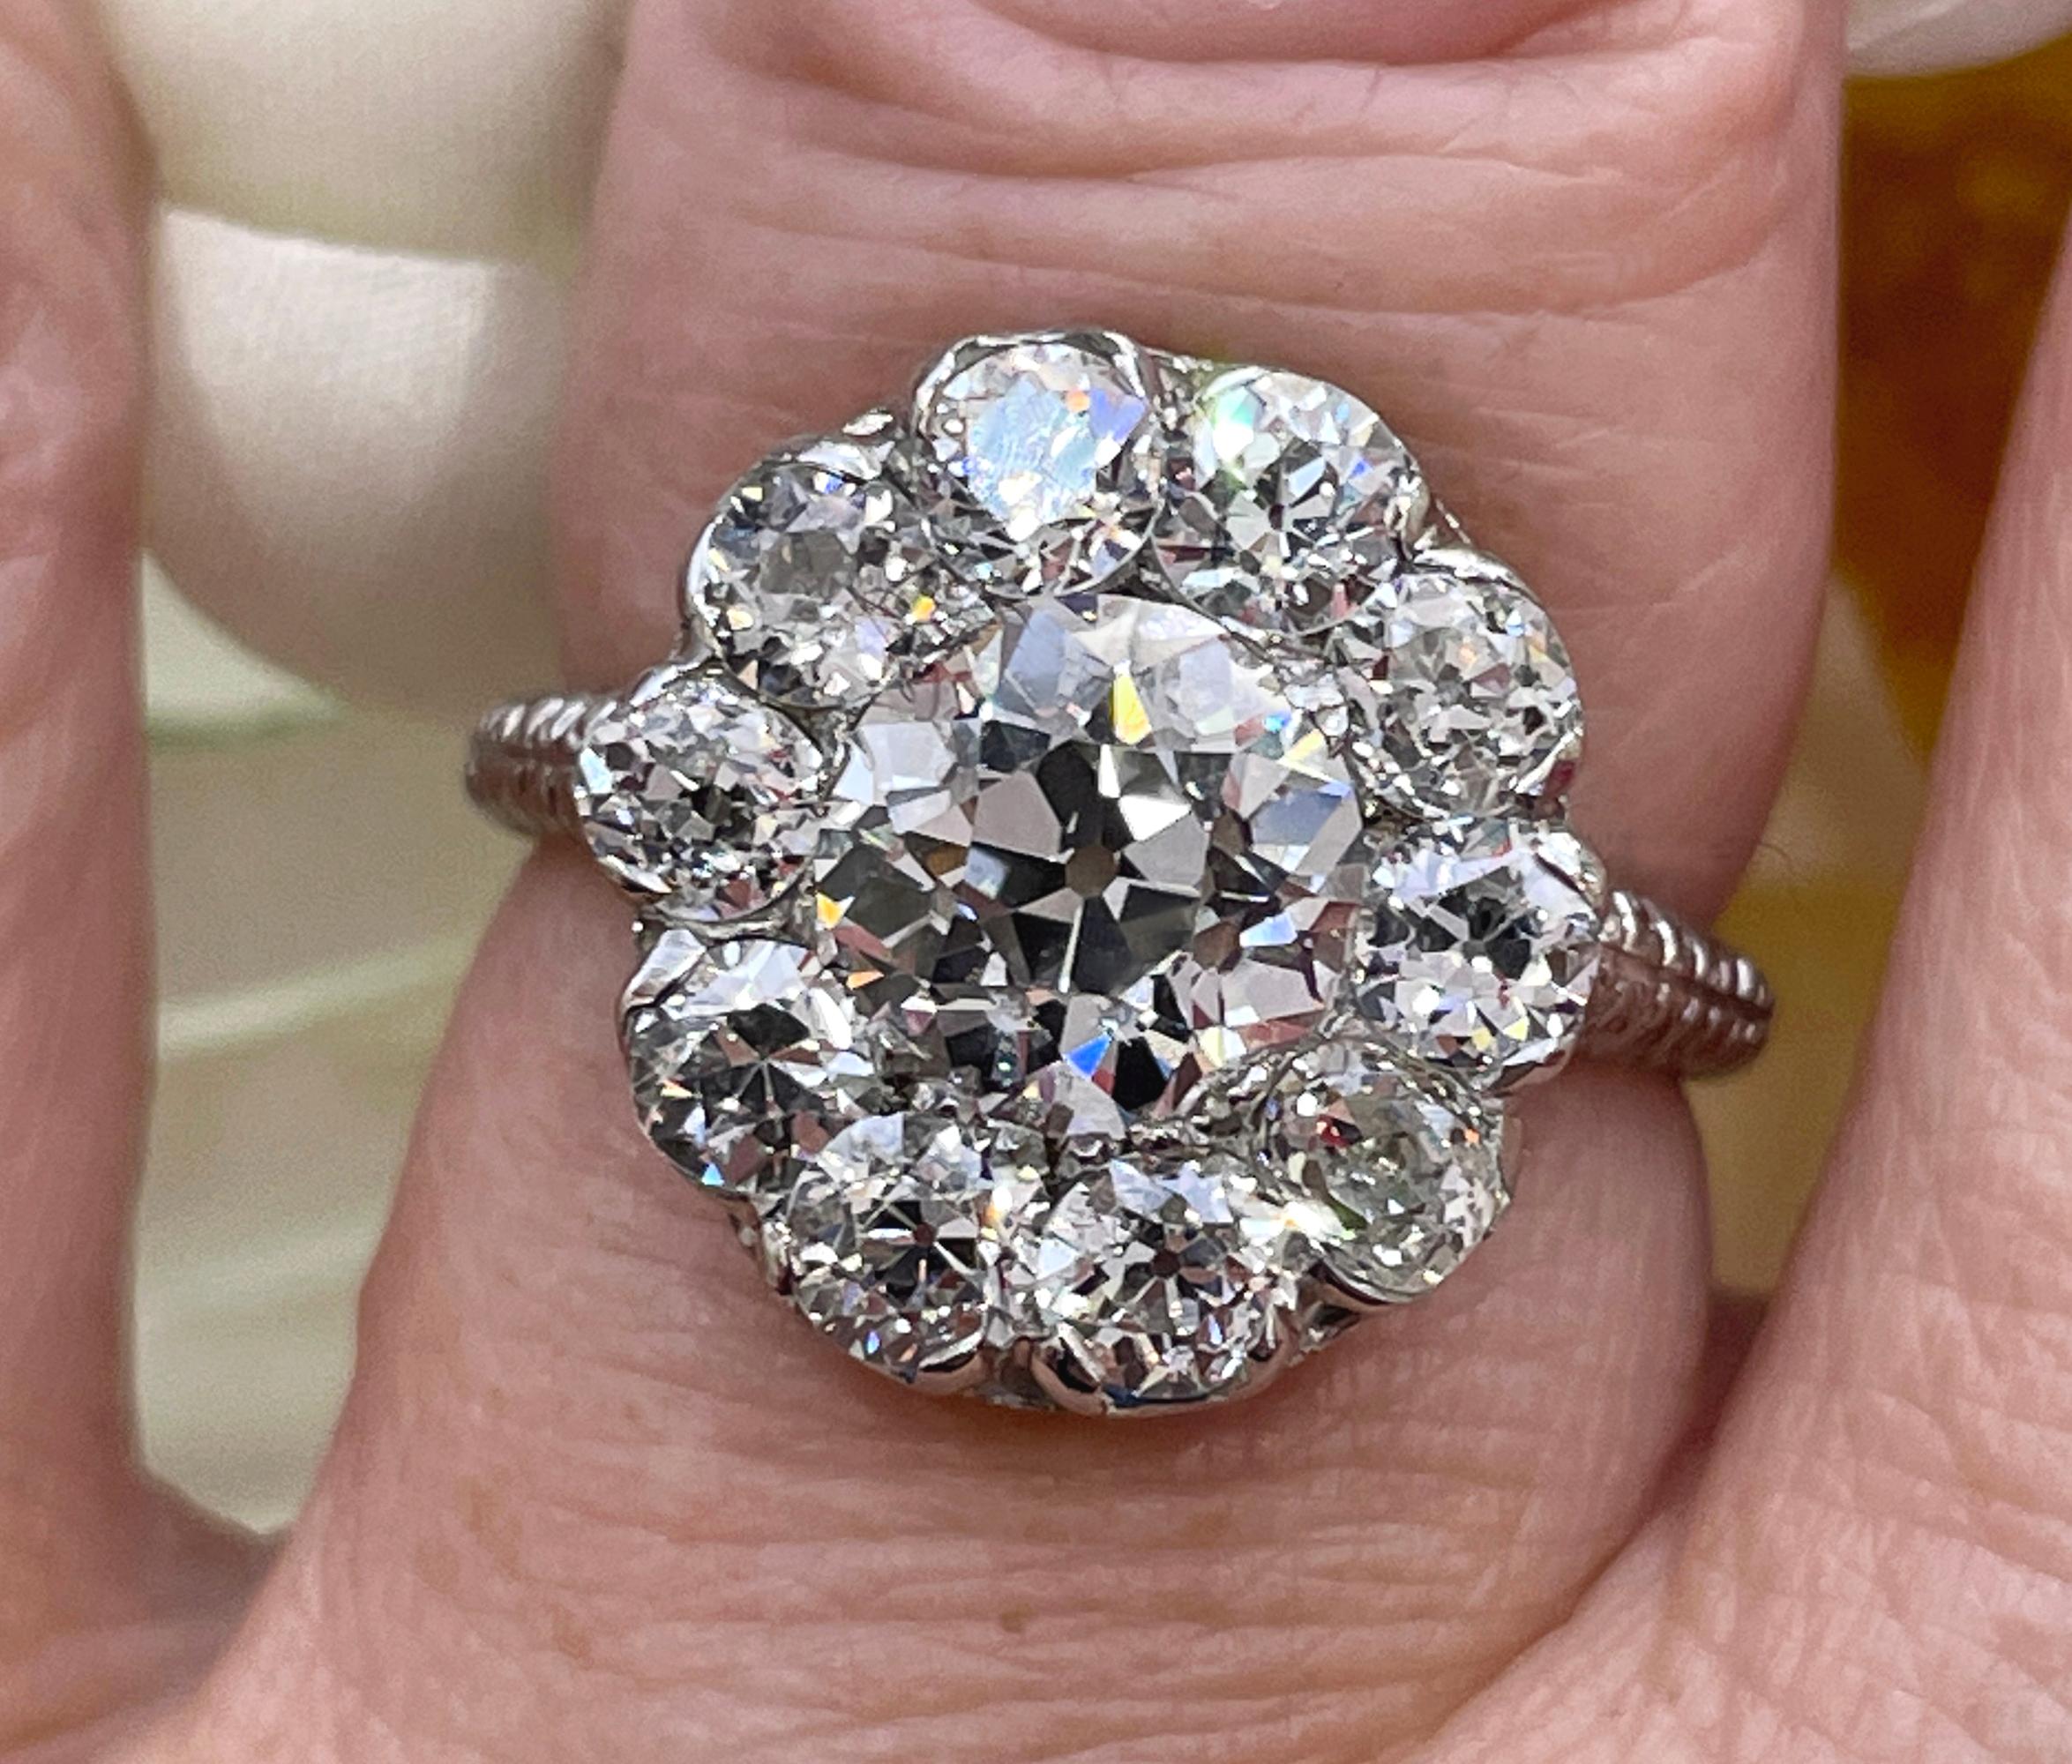 Women's Antique Edwardian 1900s GIA H-VS2 3.38ctw OLD Euro Cut Diamond Cluster Plat Ring For Sale